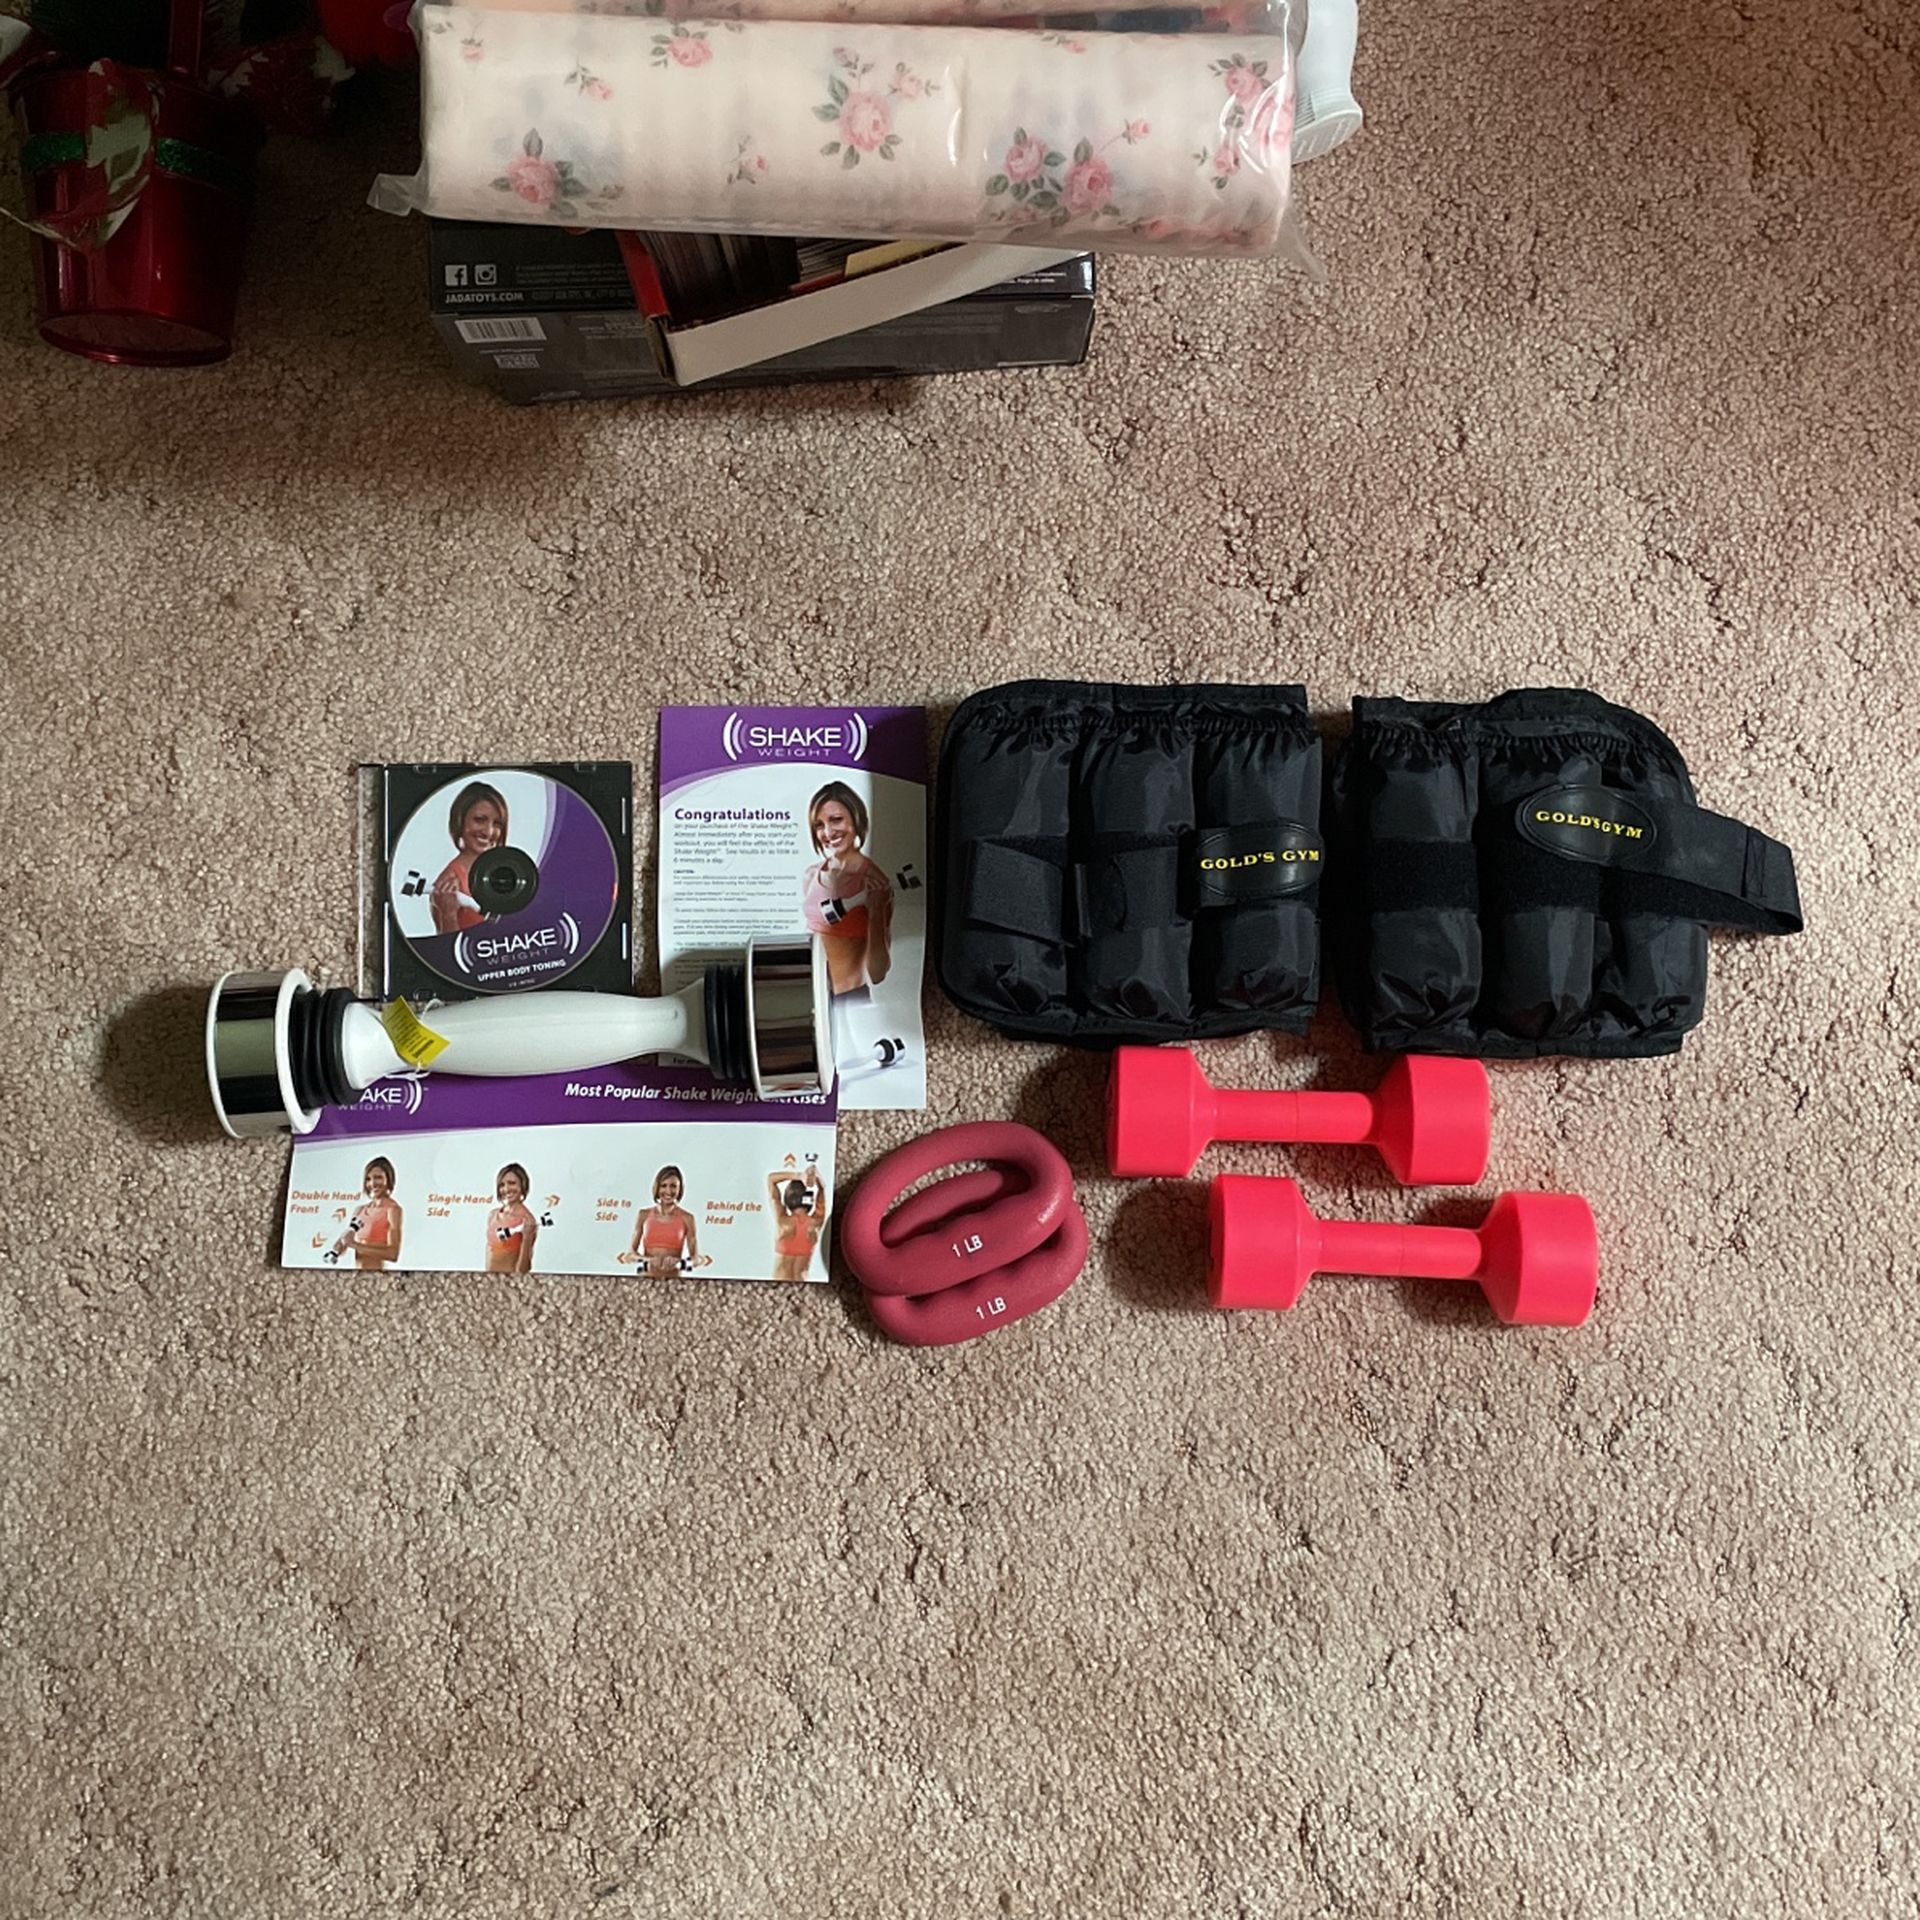 Fitness Lot: SHAKE Weight Training System, 5 Lb Golds Gym Ankle Weight Pair, 2 1 Lb Dumbbells, 2 1 Lb Hand Weights